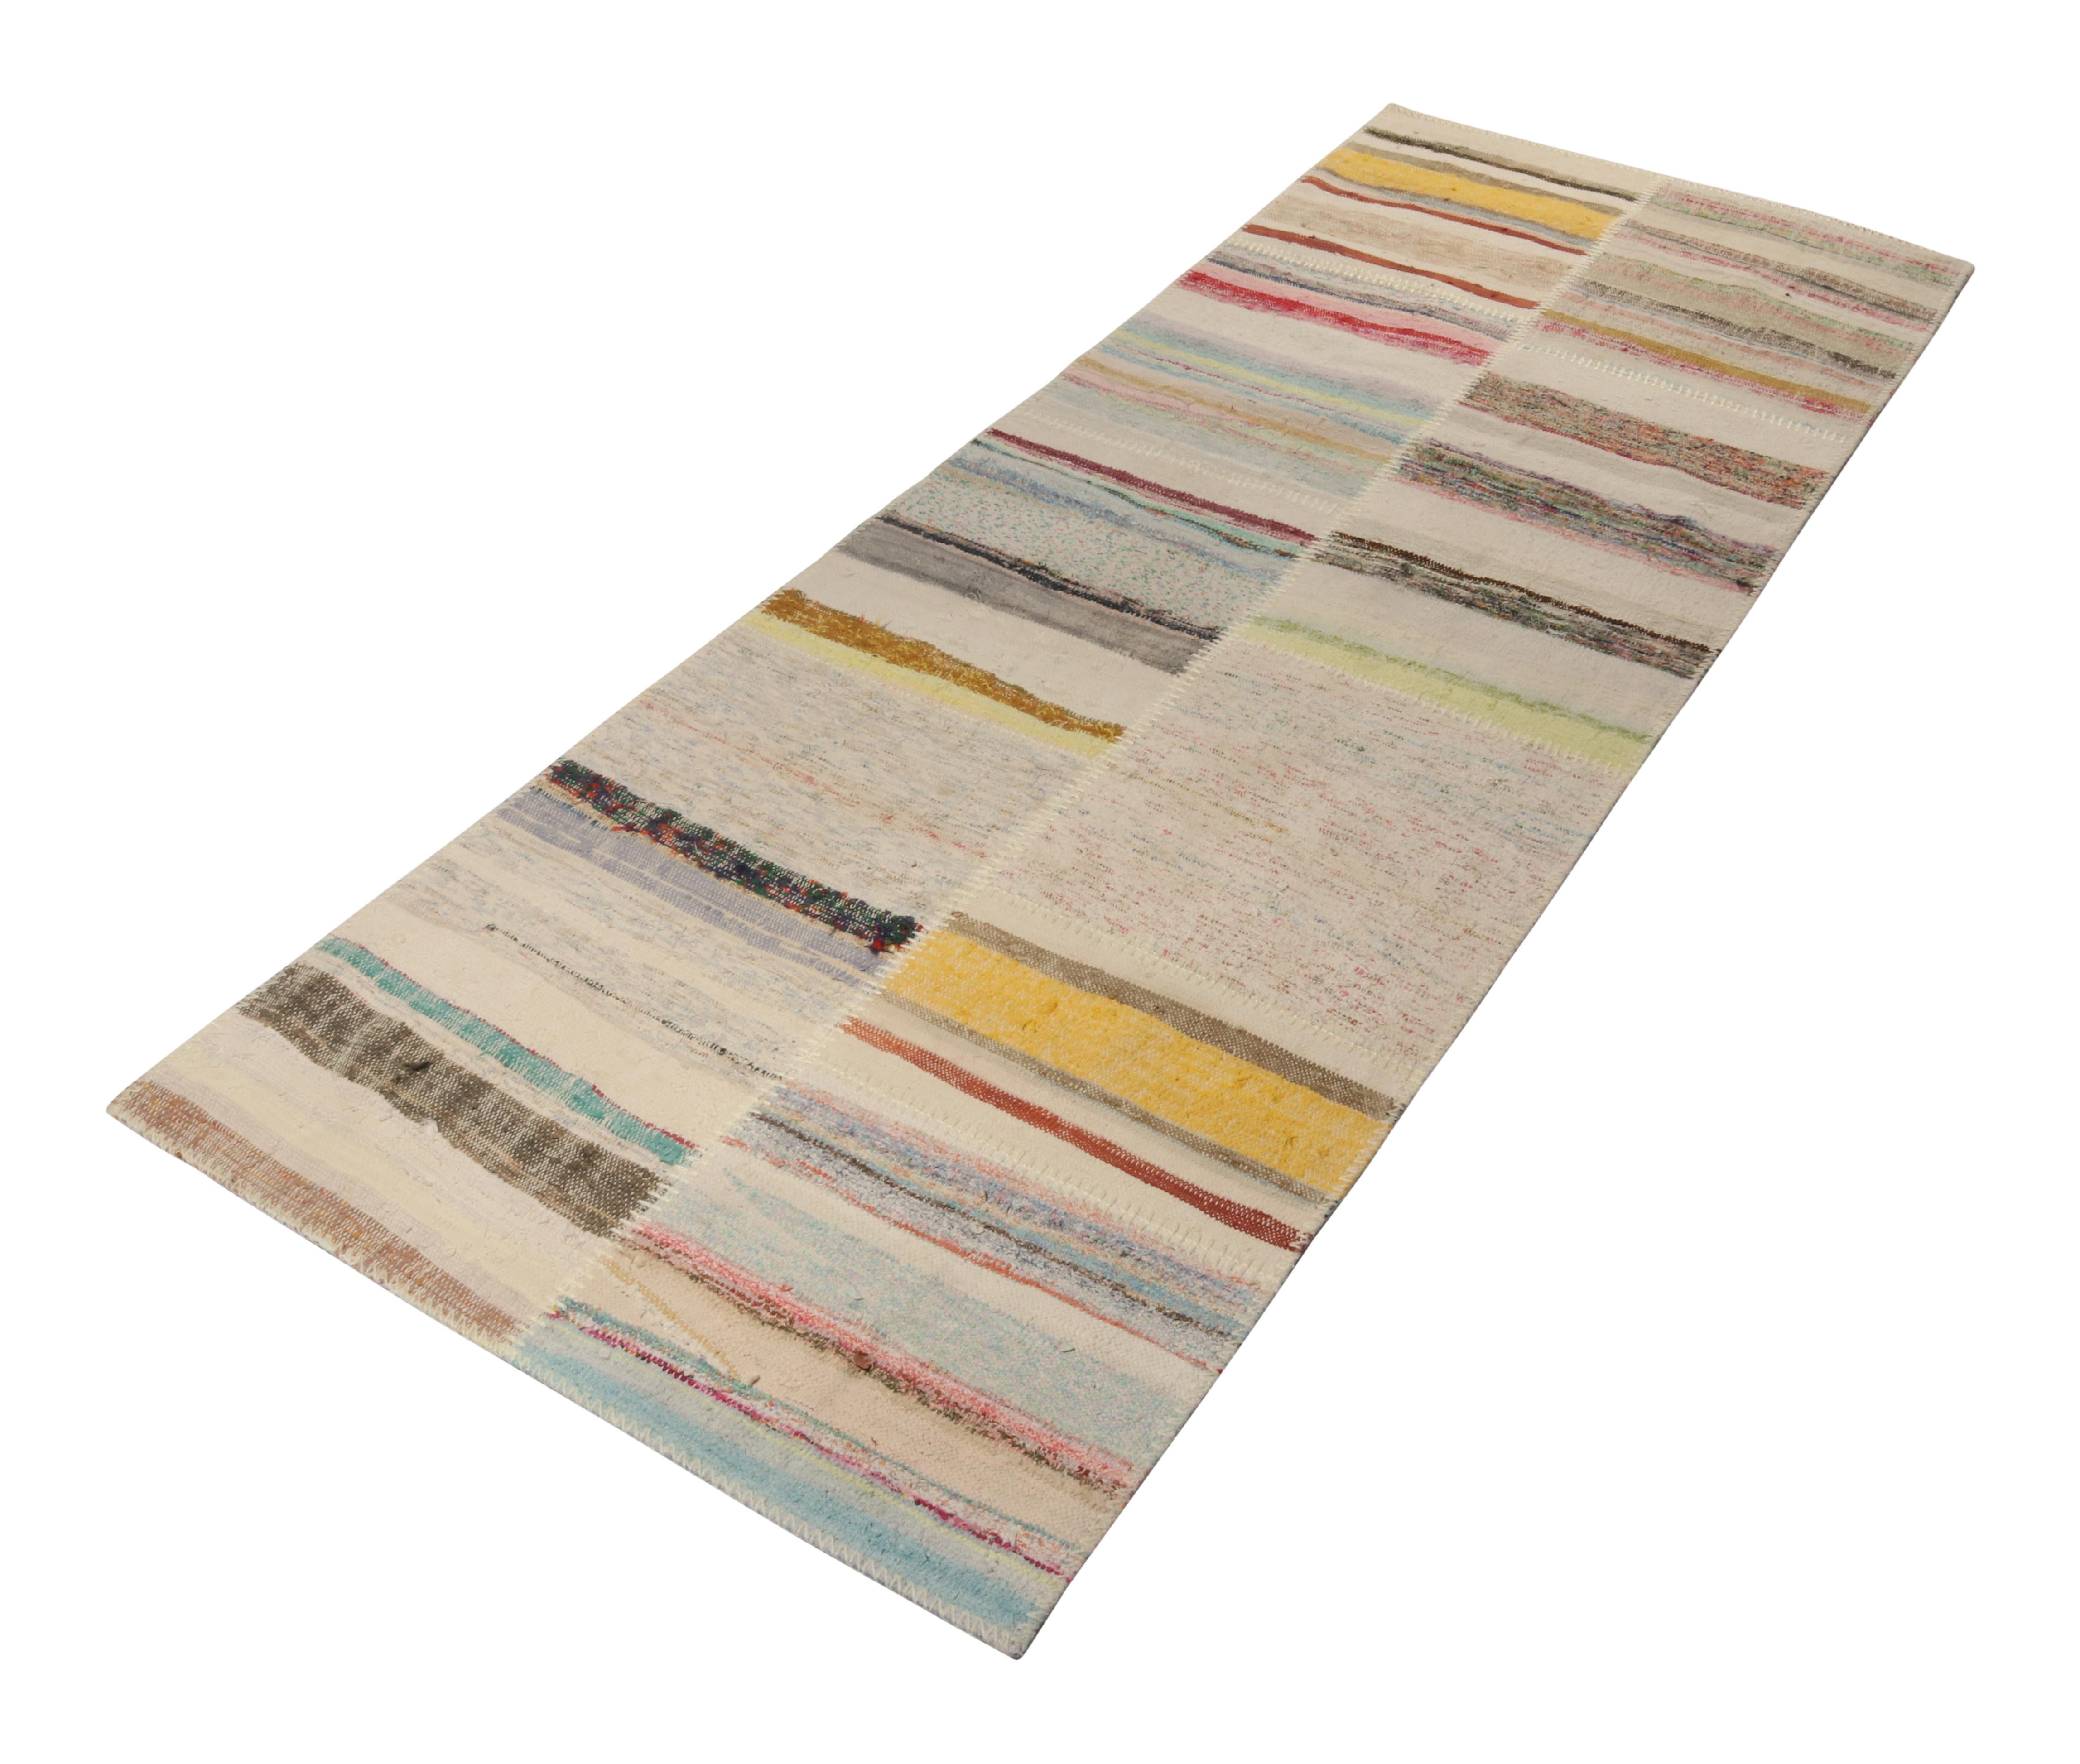 Handwoven in wool, Rug & Kilim presents a 3x8 contemporary runner from their innovative new patchwork kilim collection. 

On the Design: 

This flat weave technique repurposes vintage yarns in polychromatic stripes and striae, achieving a